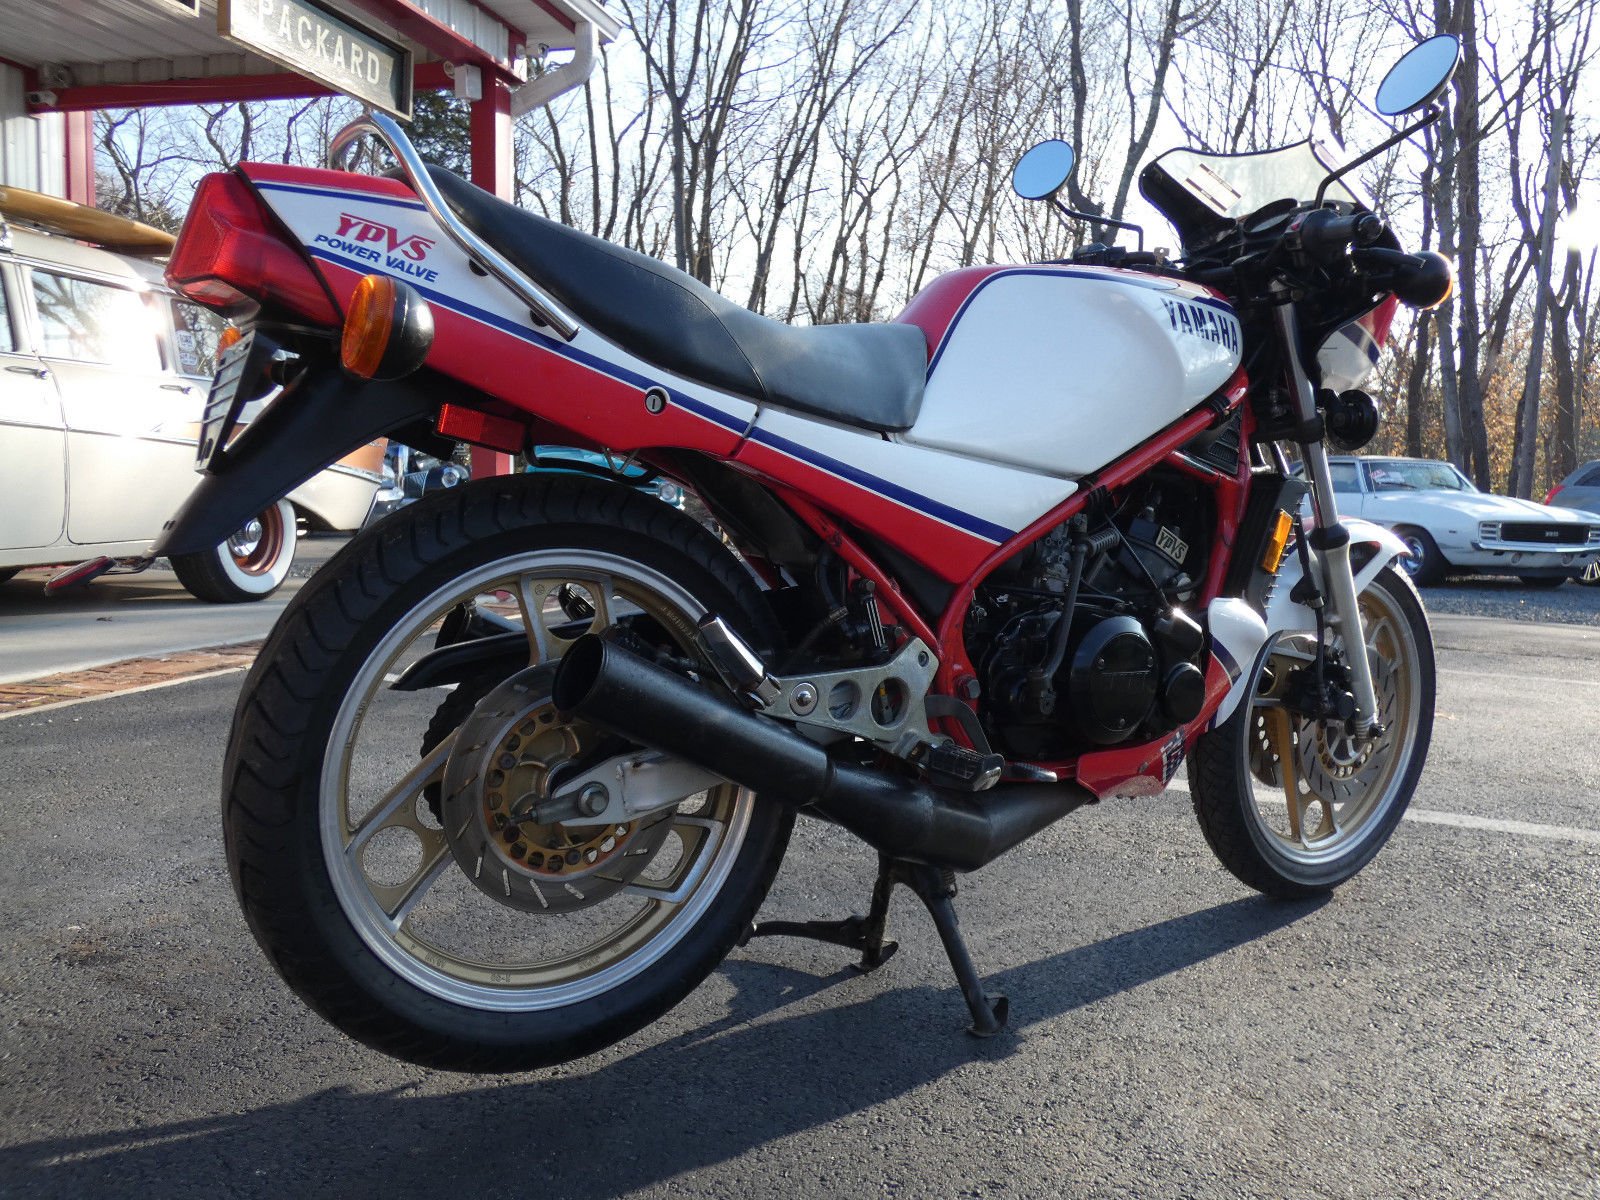 rz350 Archives - Page 13 of 13 - Rare SportBikes For Sale